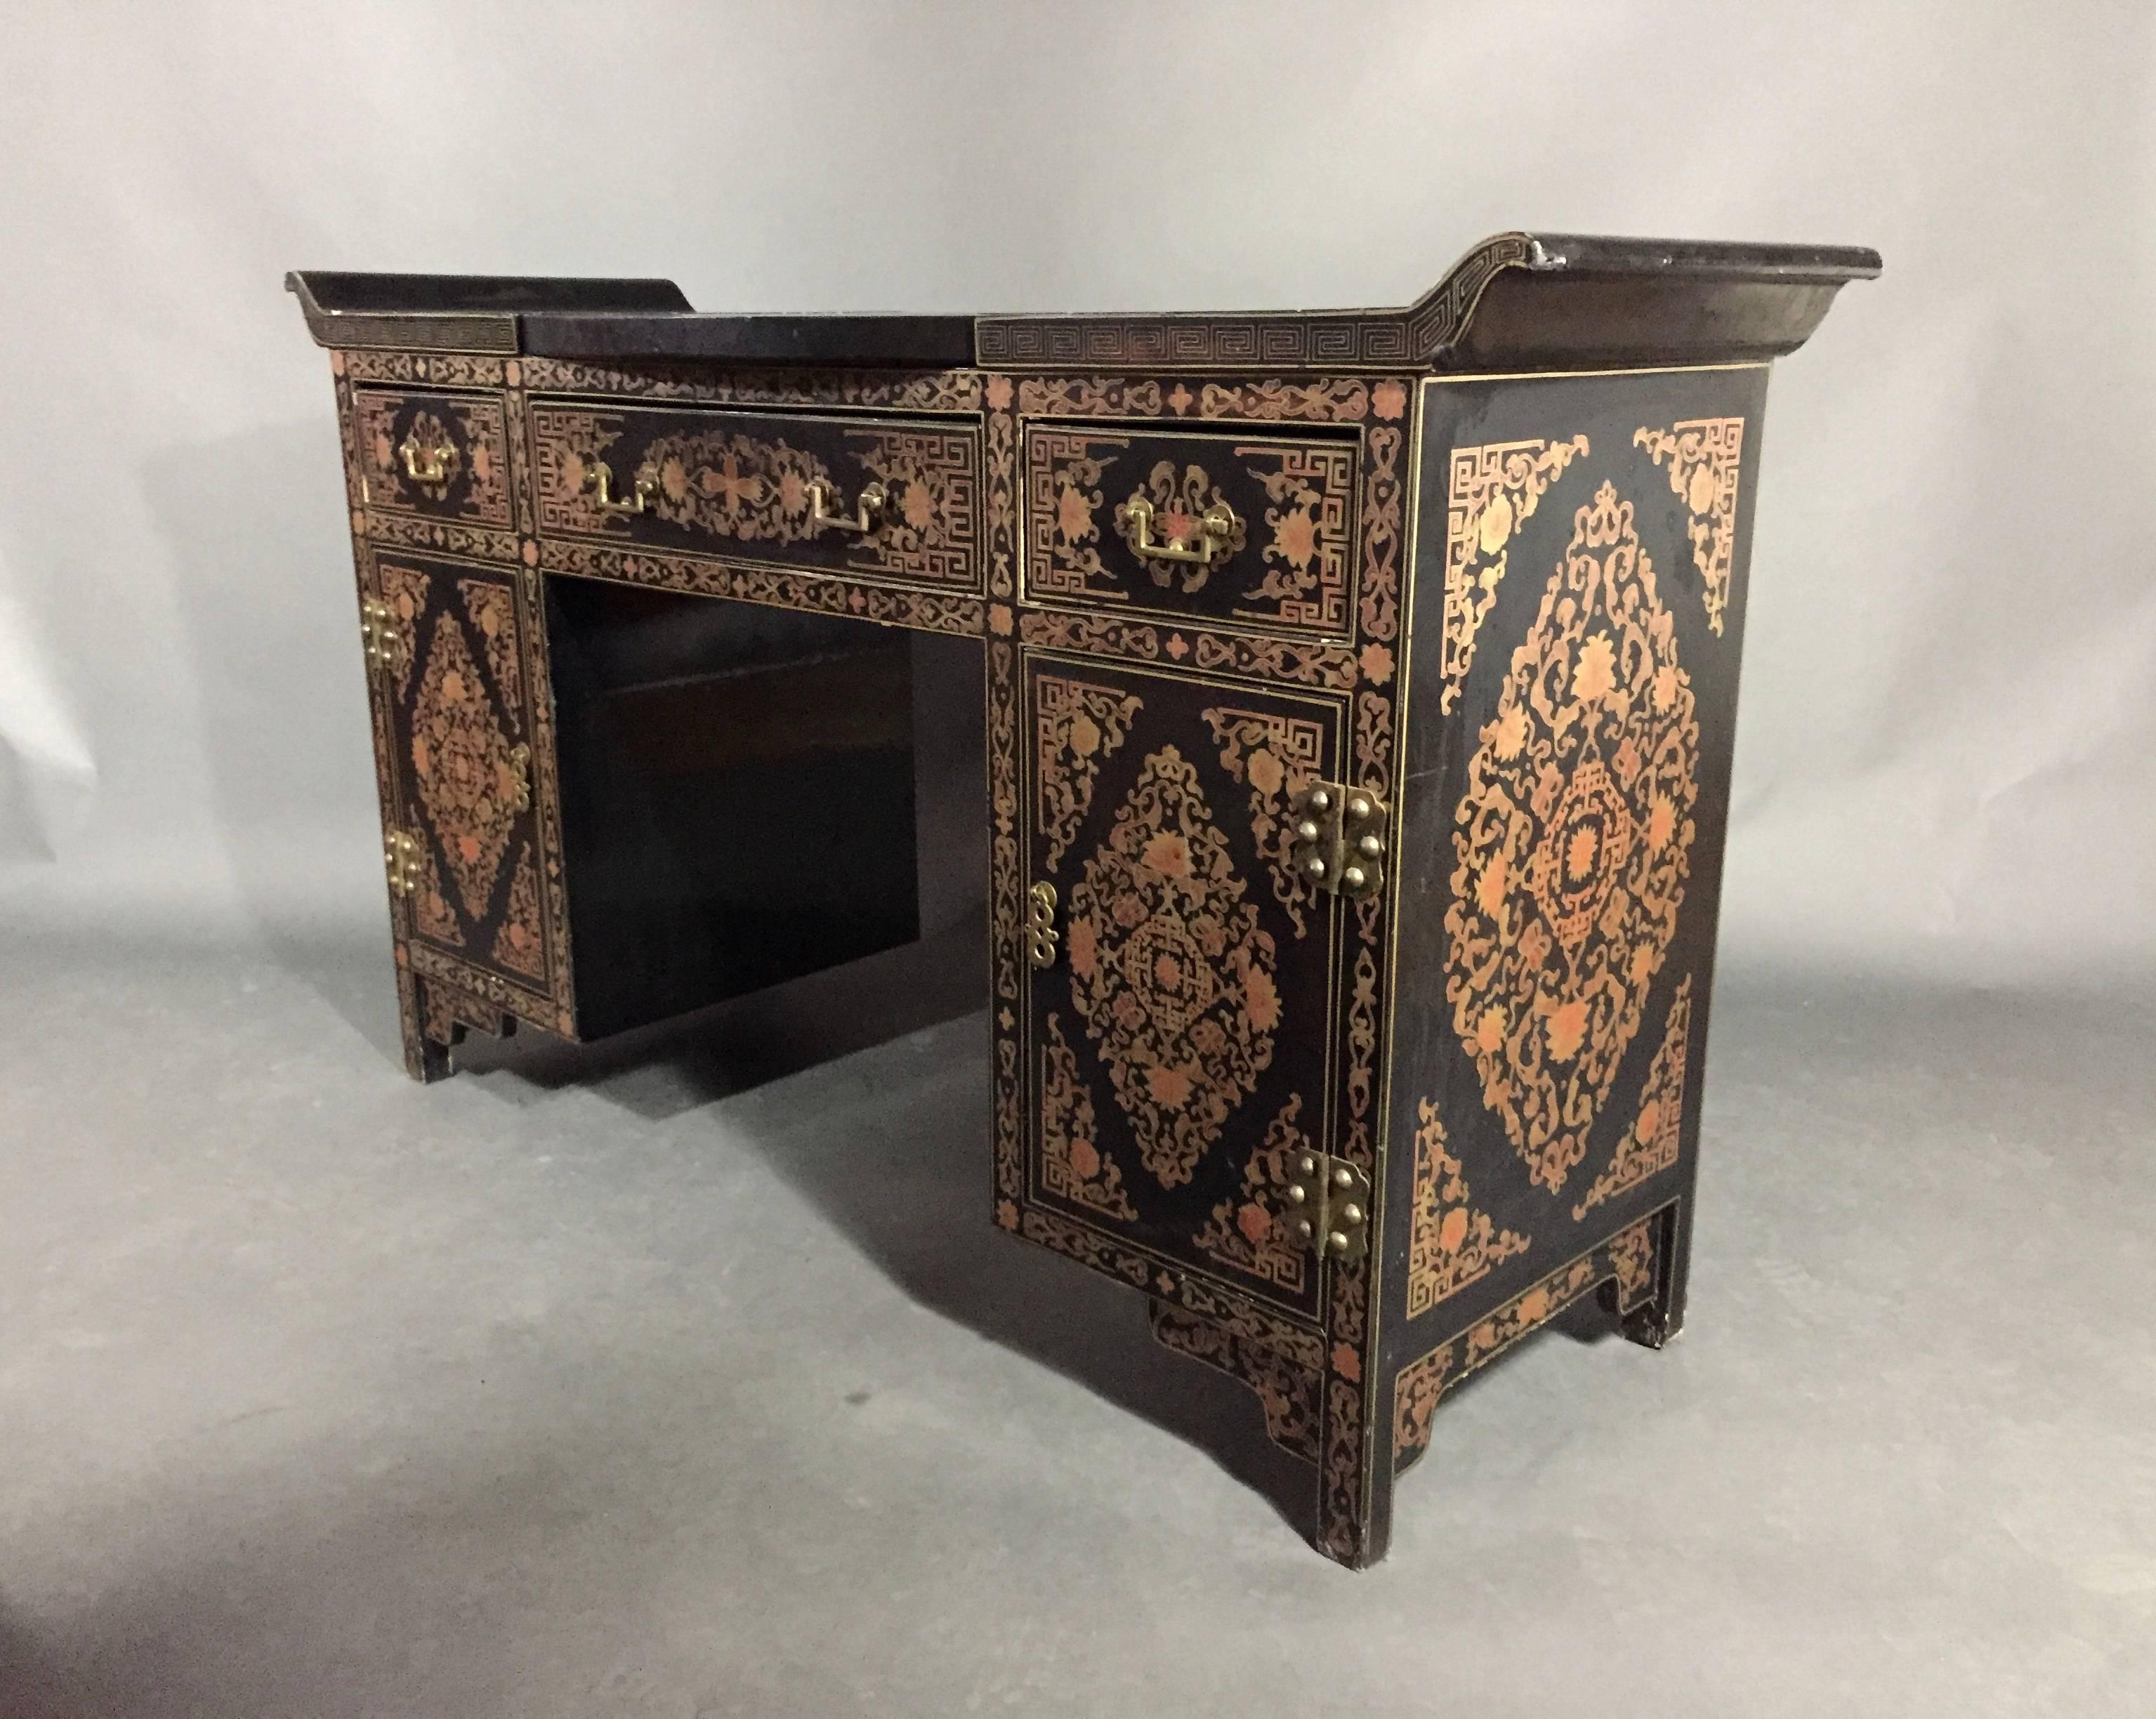 An intricately red/gold decorated black lacquer Chinese dressing table with flip-up mirror and matching stool. Would be a gorgeous console table. Excellent condition. Original export sticker on back. Seat is 16